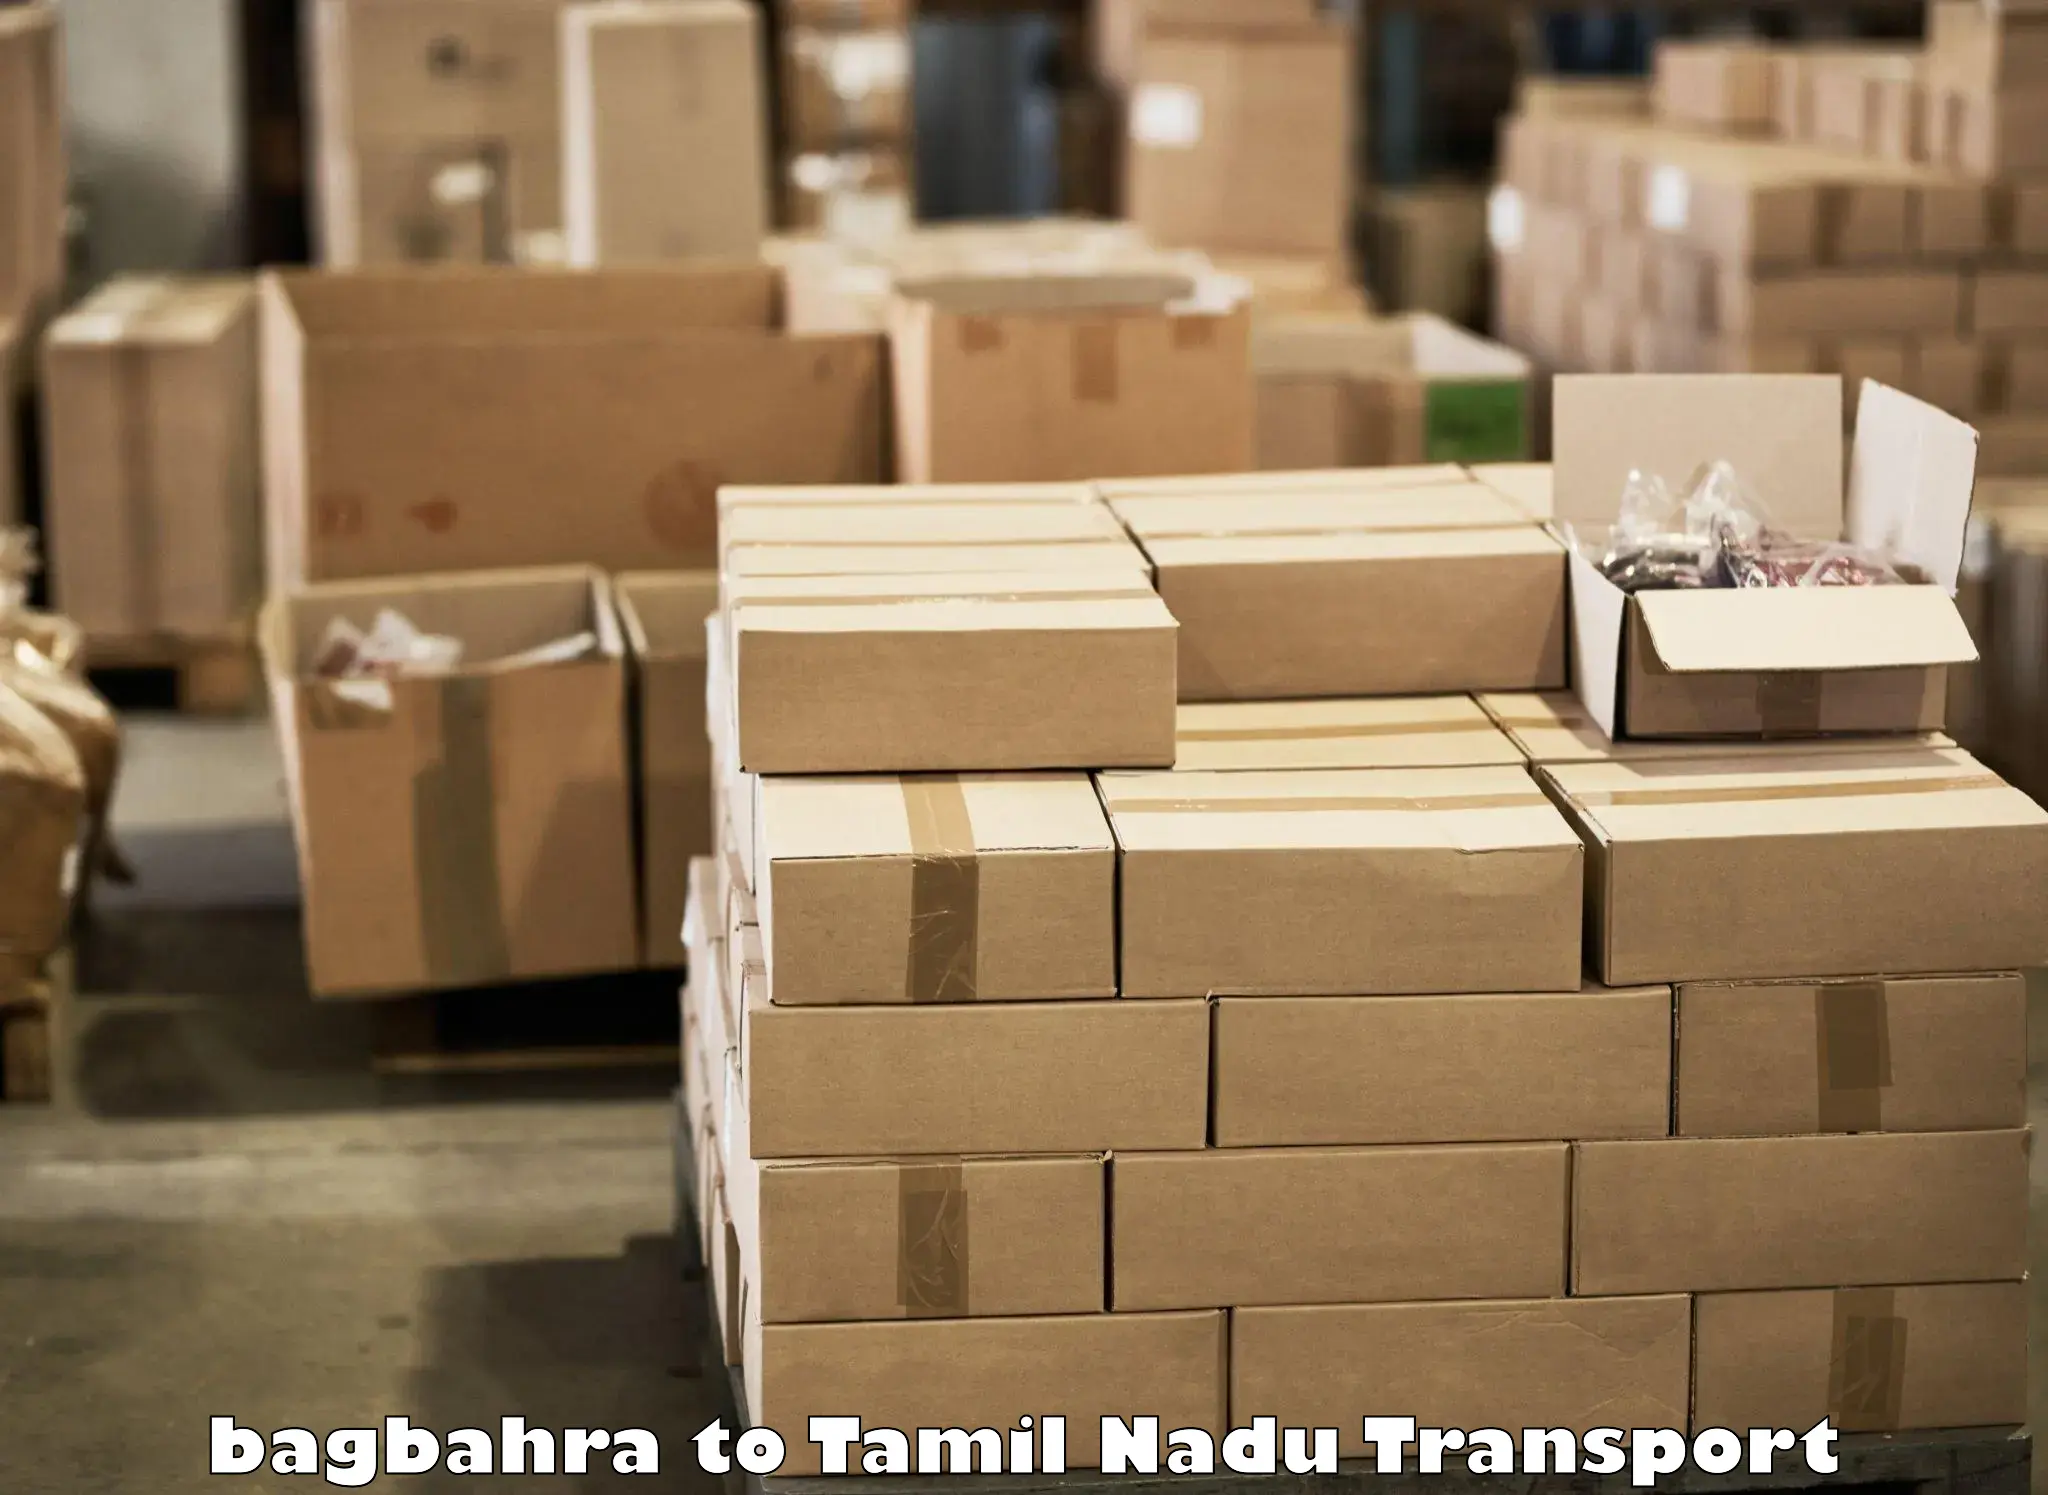 Express transport services bagbahra to Attur